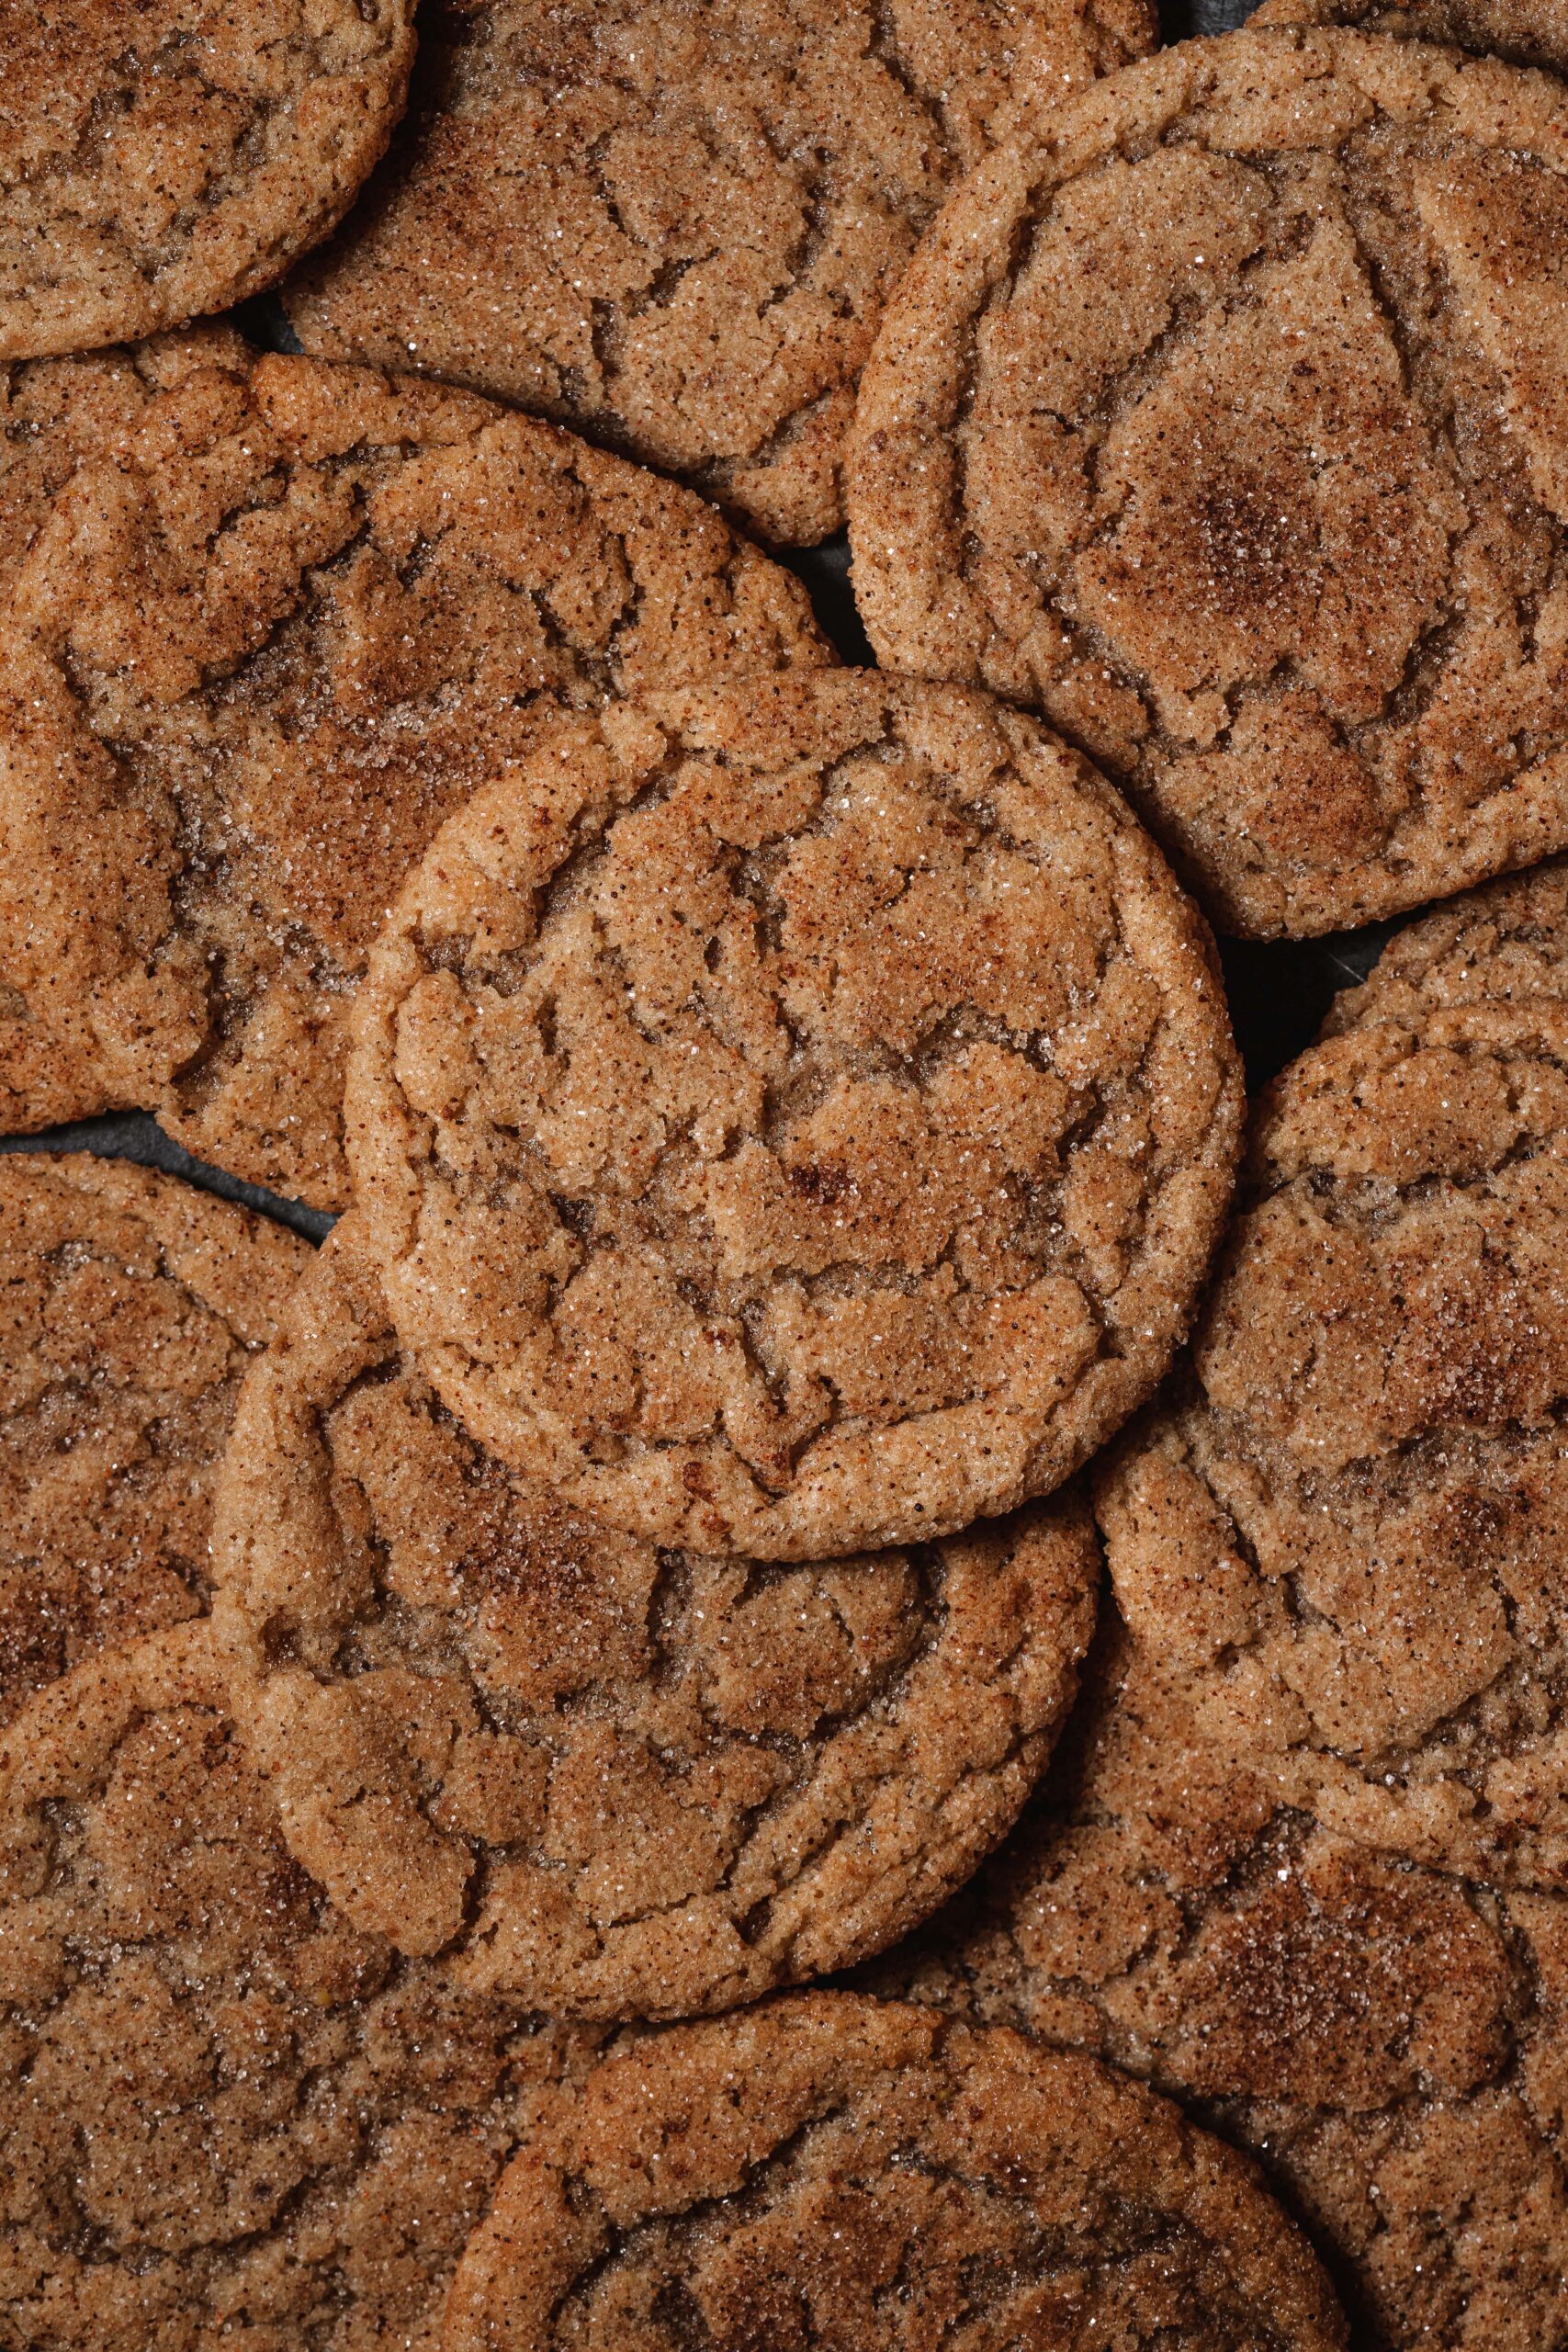 Close up of the texture of the snickerdoodle cookies.